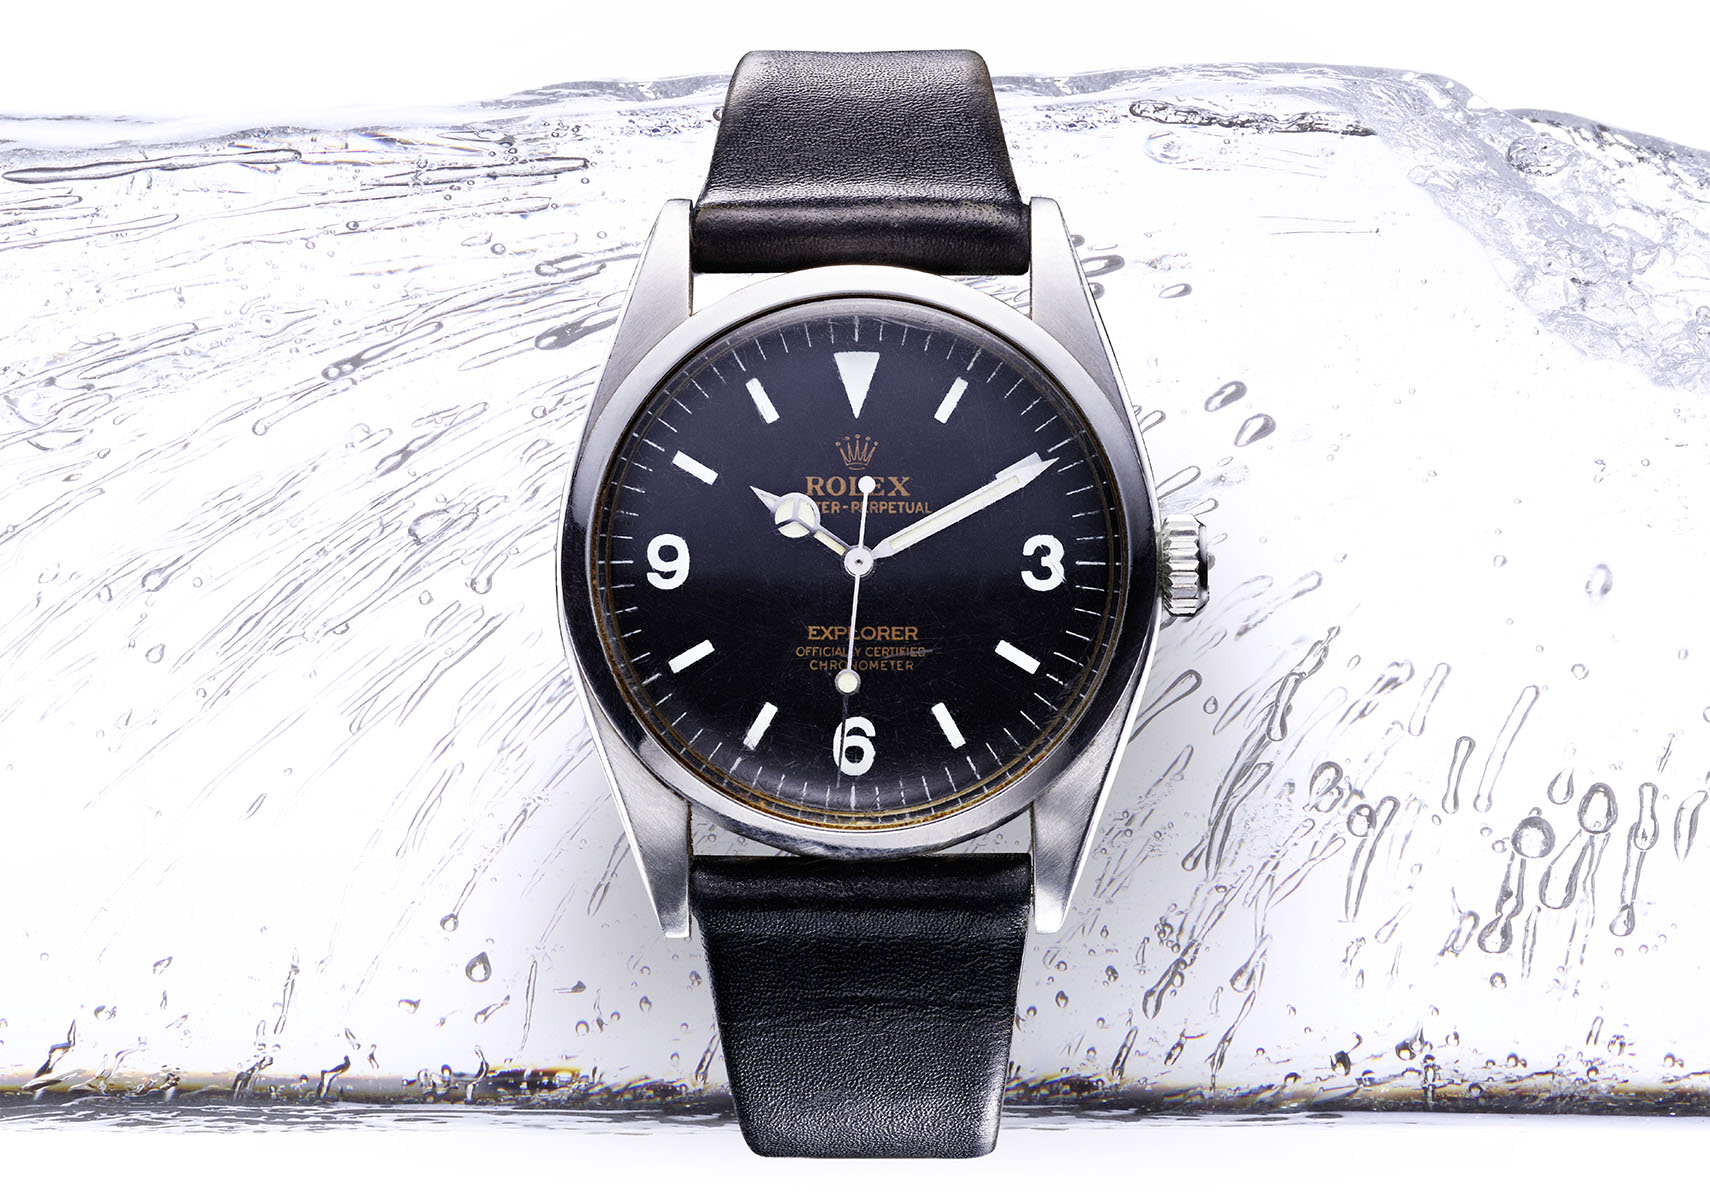 Oyster Perpetual Explorer